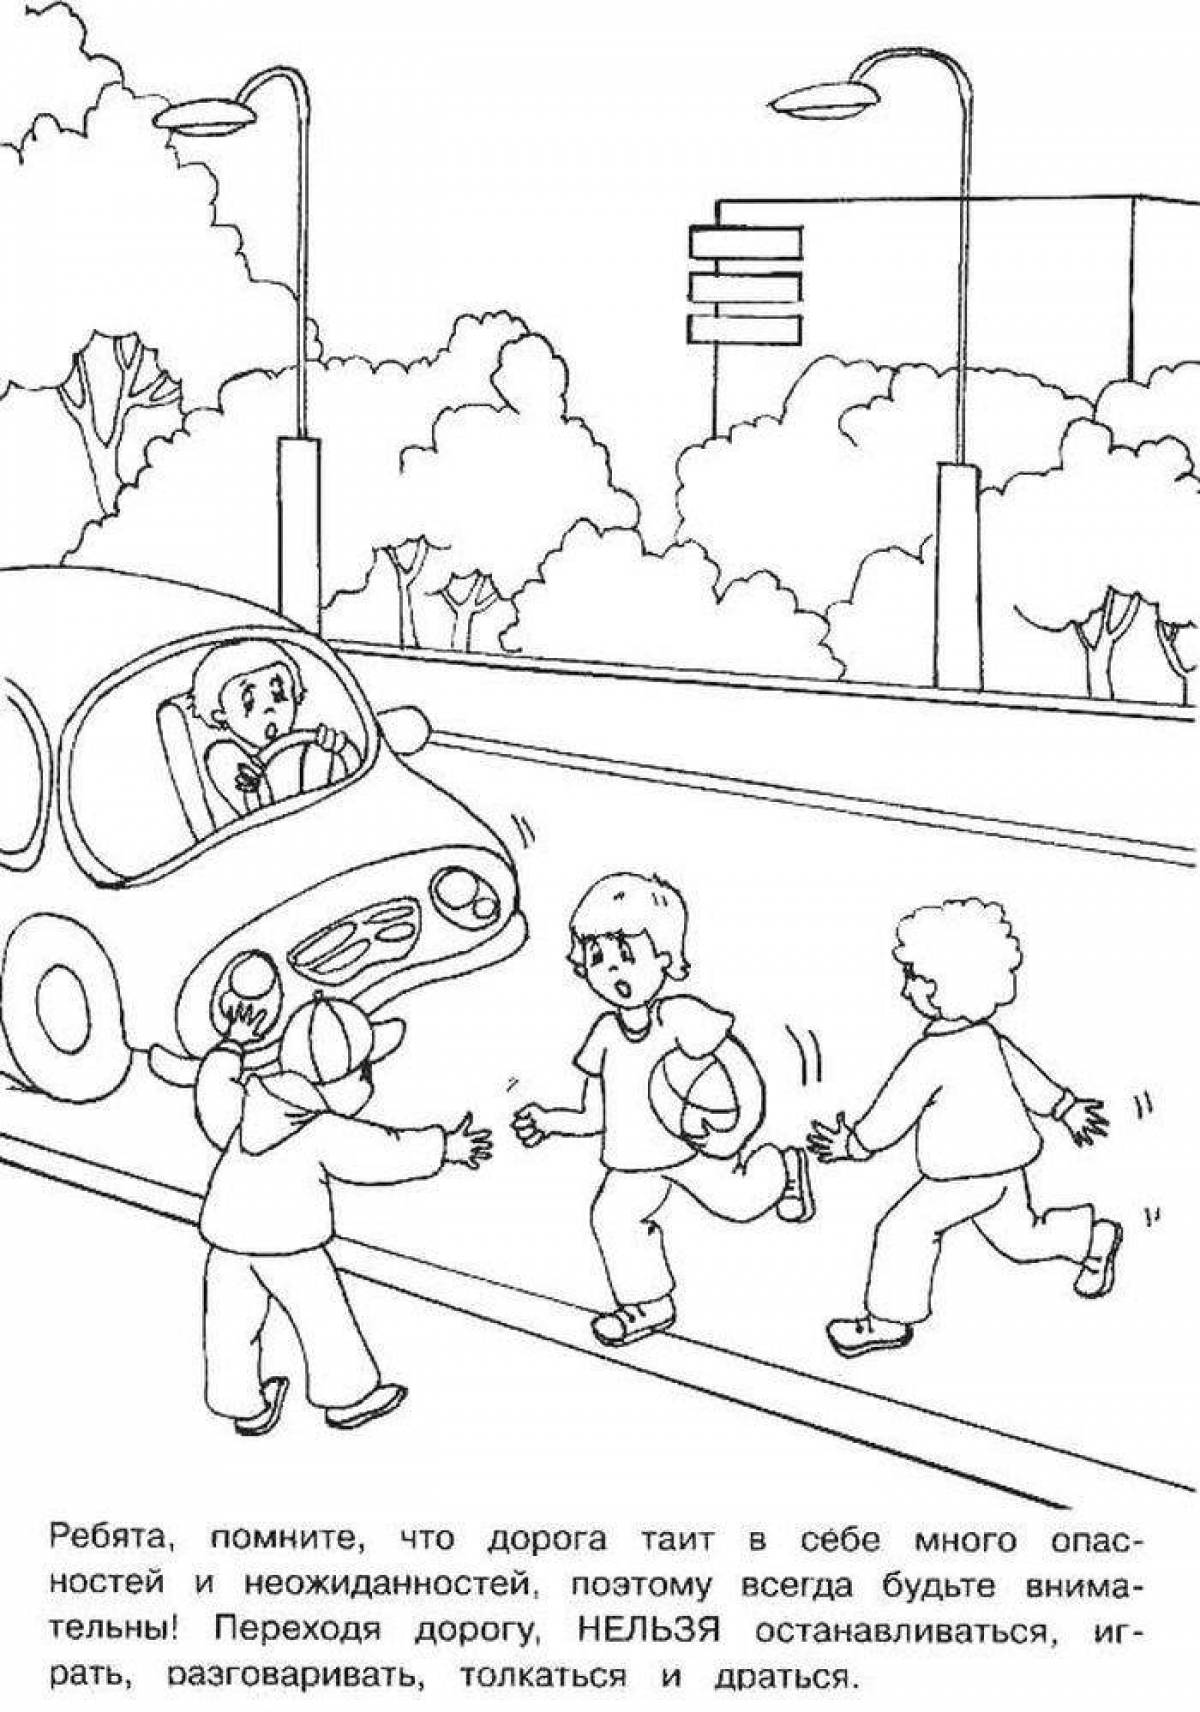 1st grade traffic rules coloring page